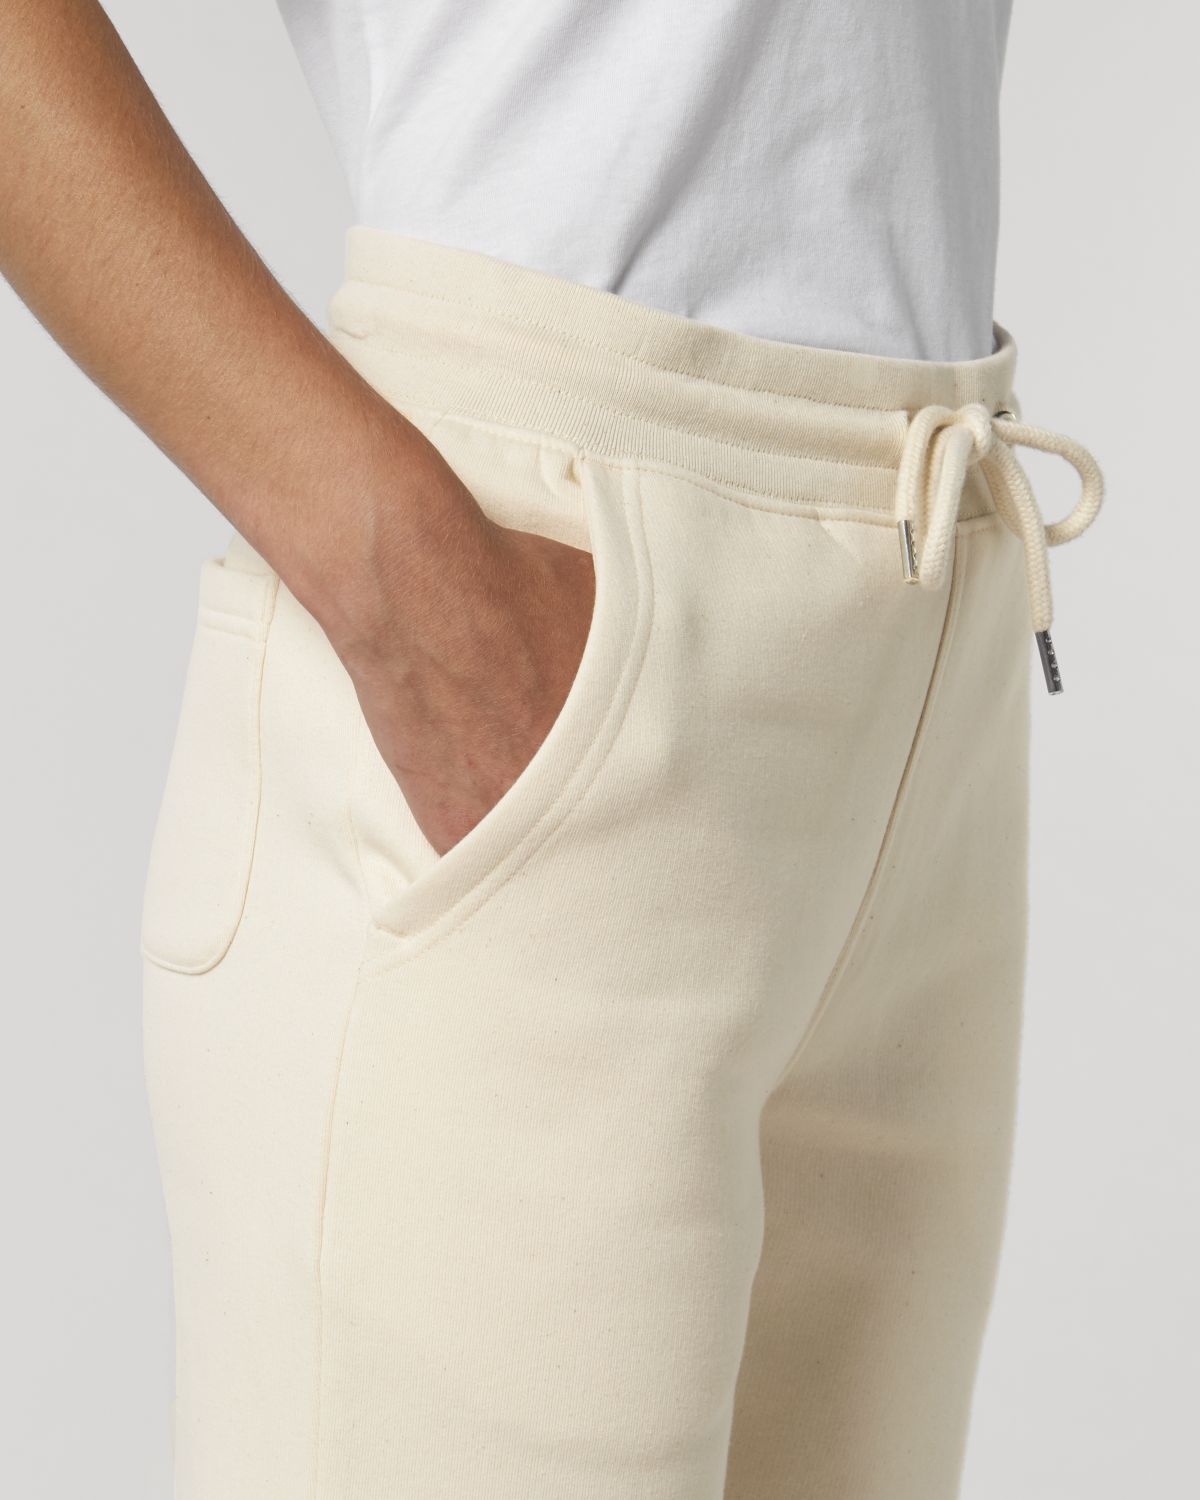 Stanley/Stella's - Mover Jogging Pants - Natural Raw